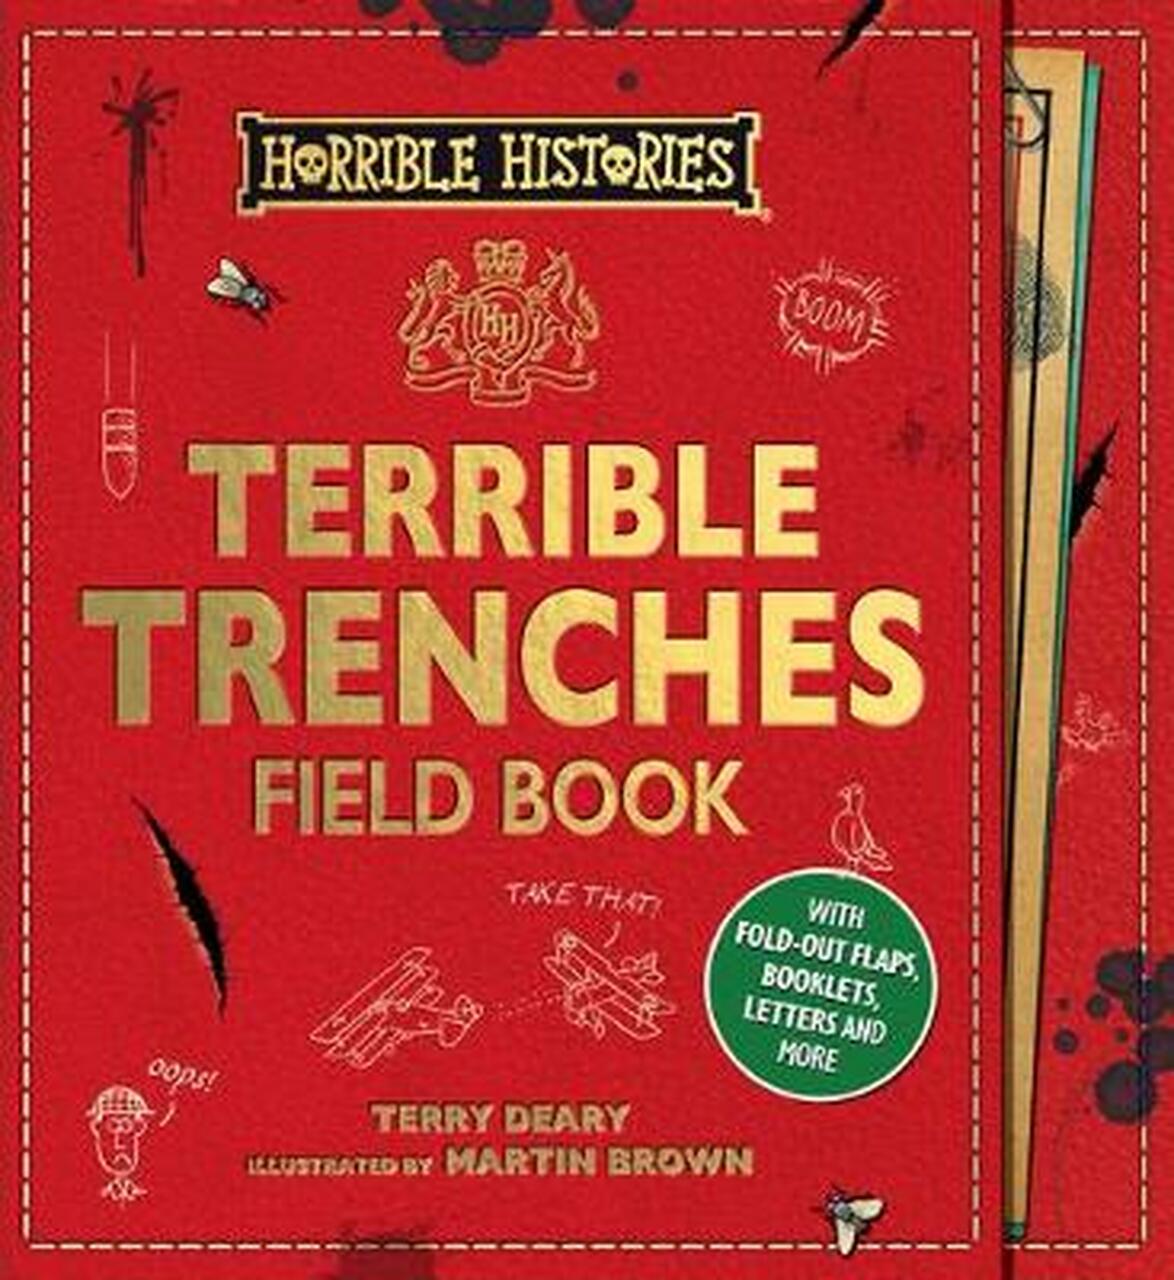 Horrible Histories, Terrible Trenches Field Book